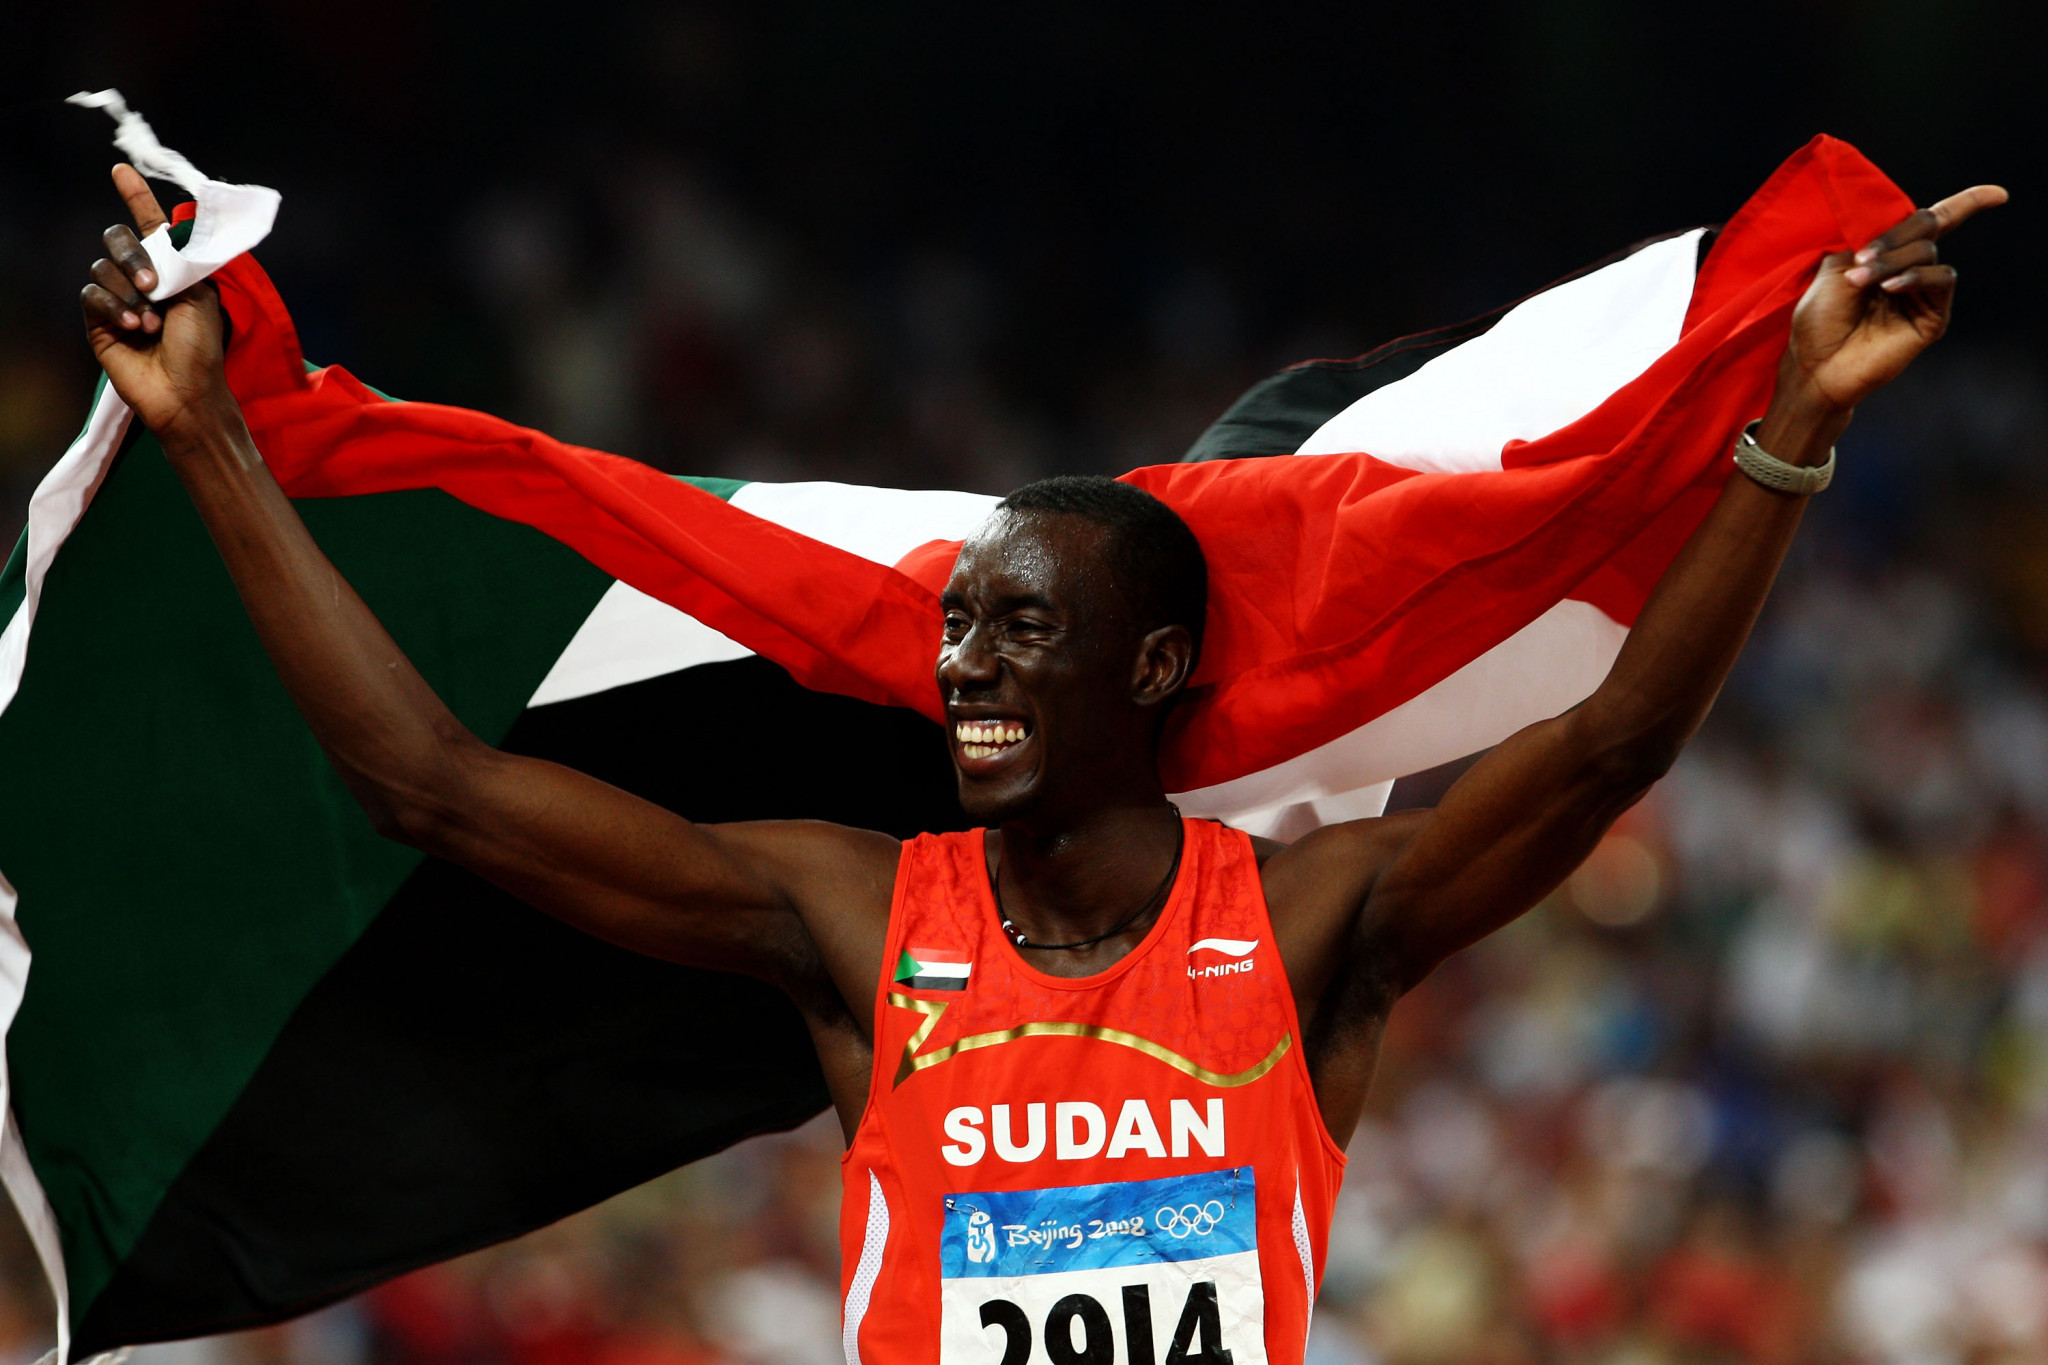 Ismail Ahmed Ismail is Sudan's only Olympic medallist ©Getty Images